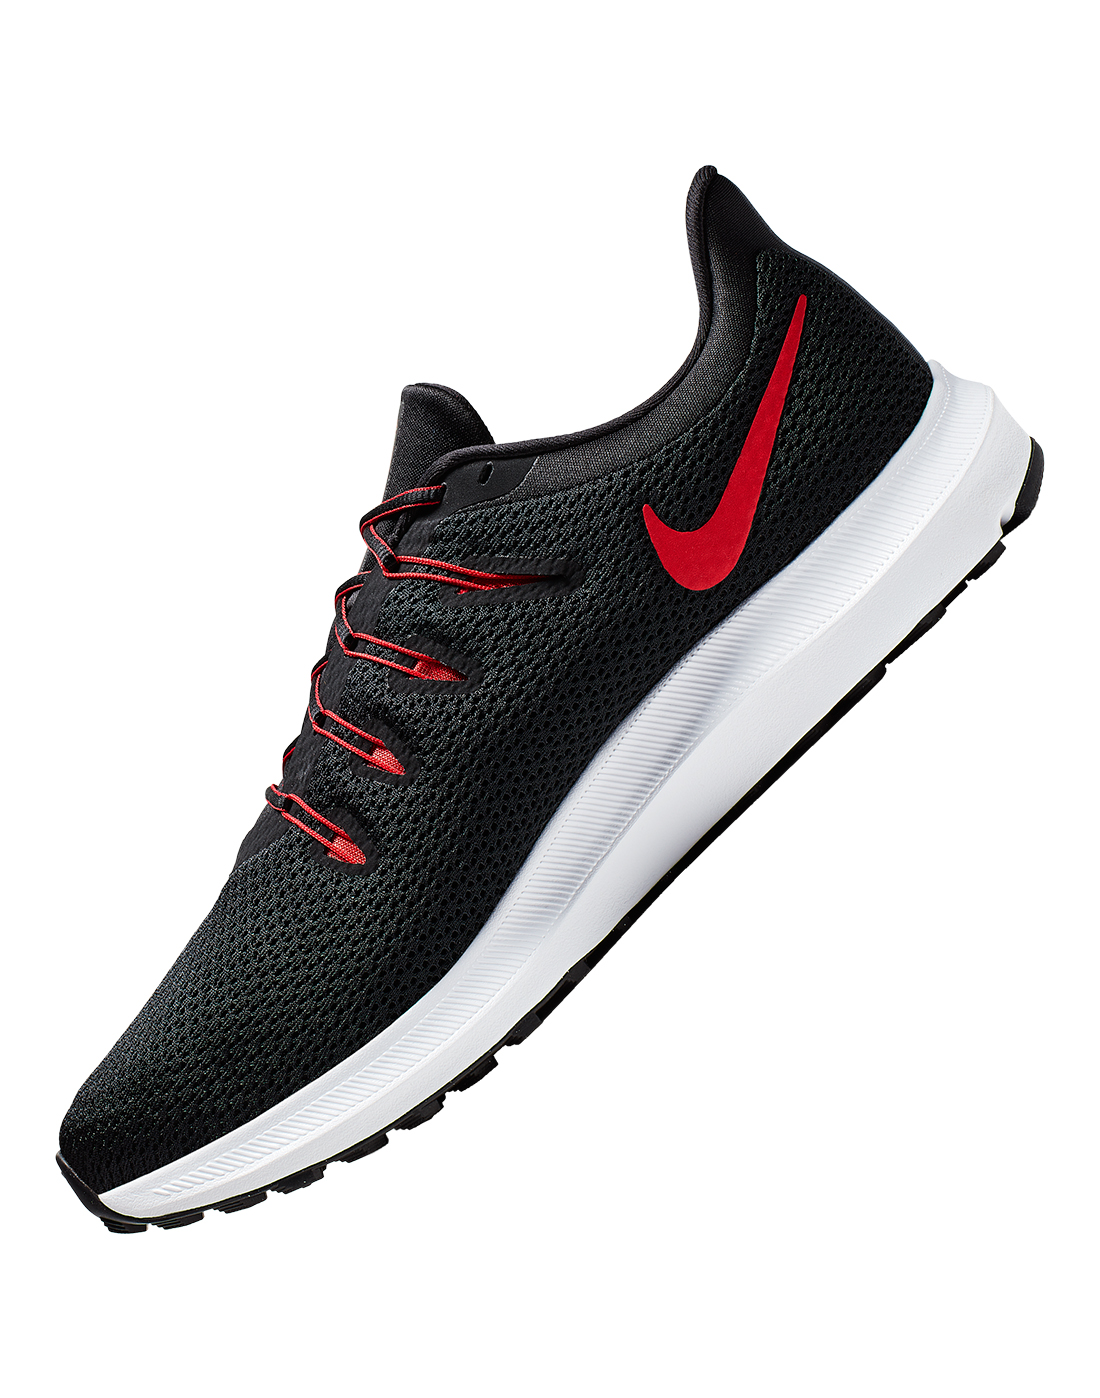 Men's Black & Red Nike Quest Running Shoes | Life Style Sports